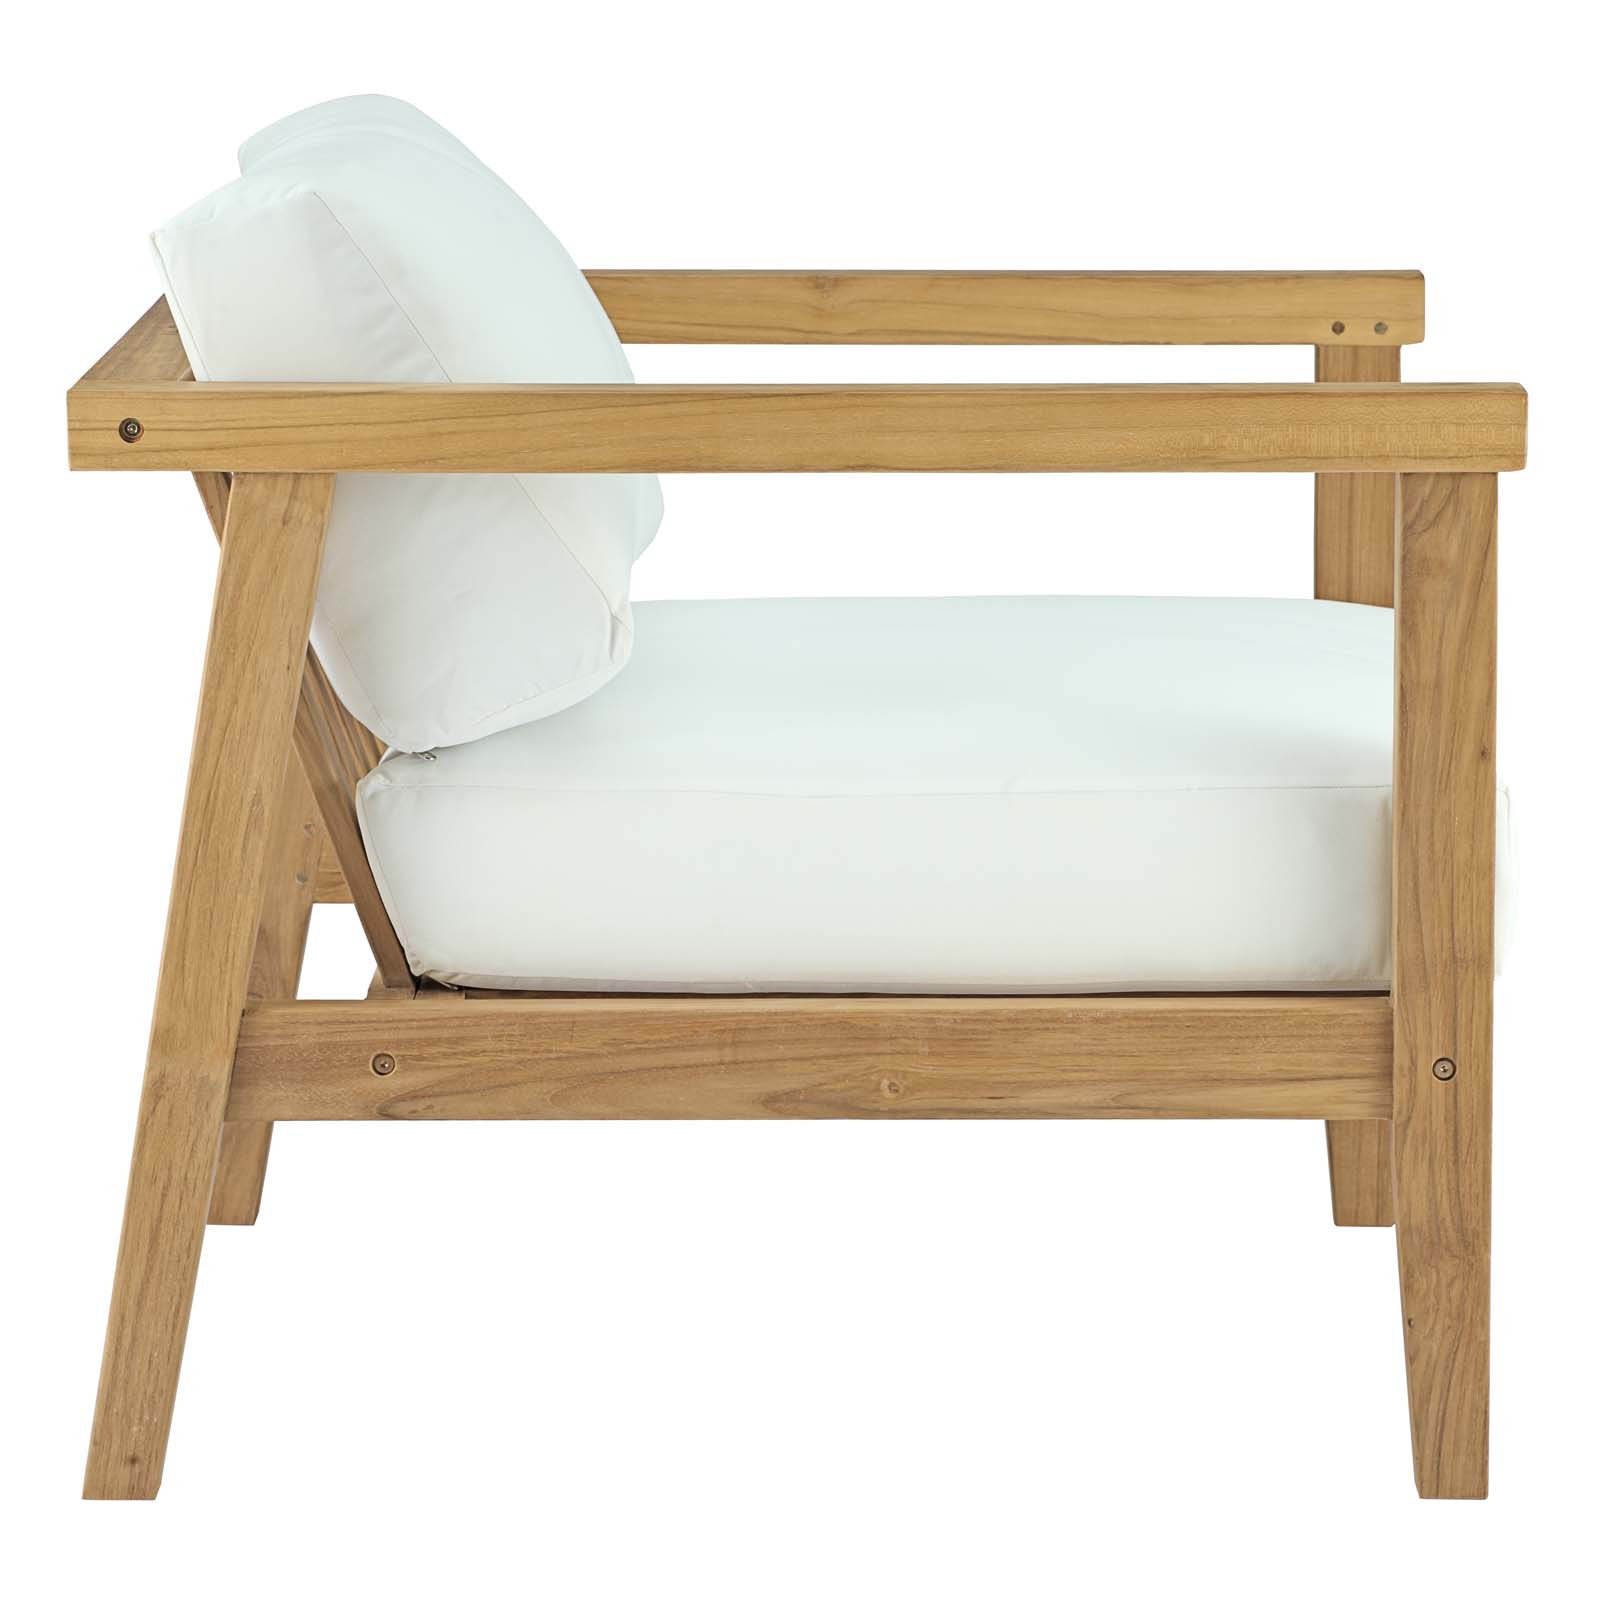 Modway Bayport Outdoor Patio Teak Armchair in Natural White - image 4 of 6